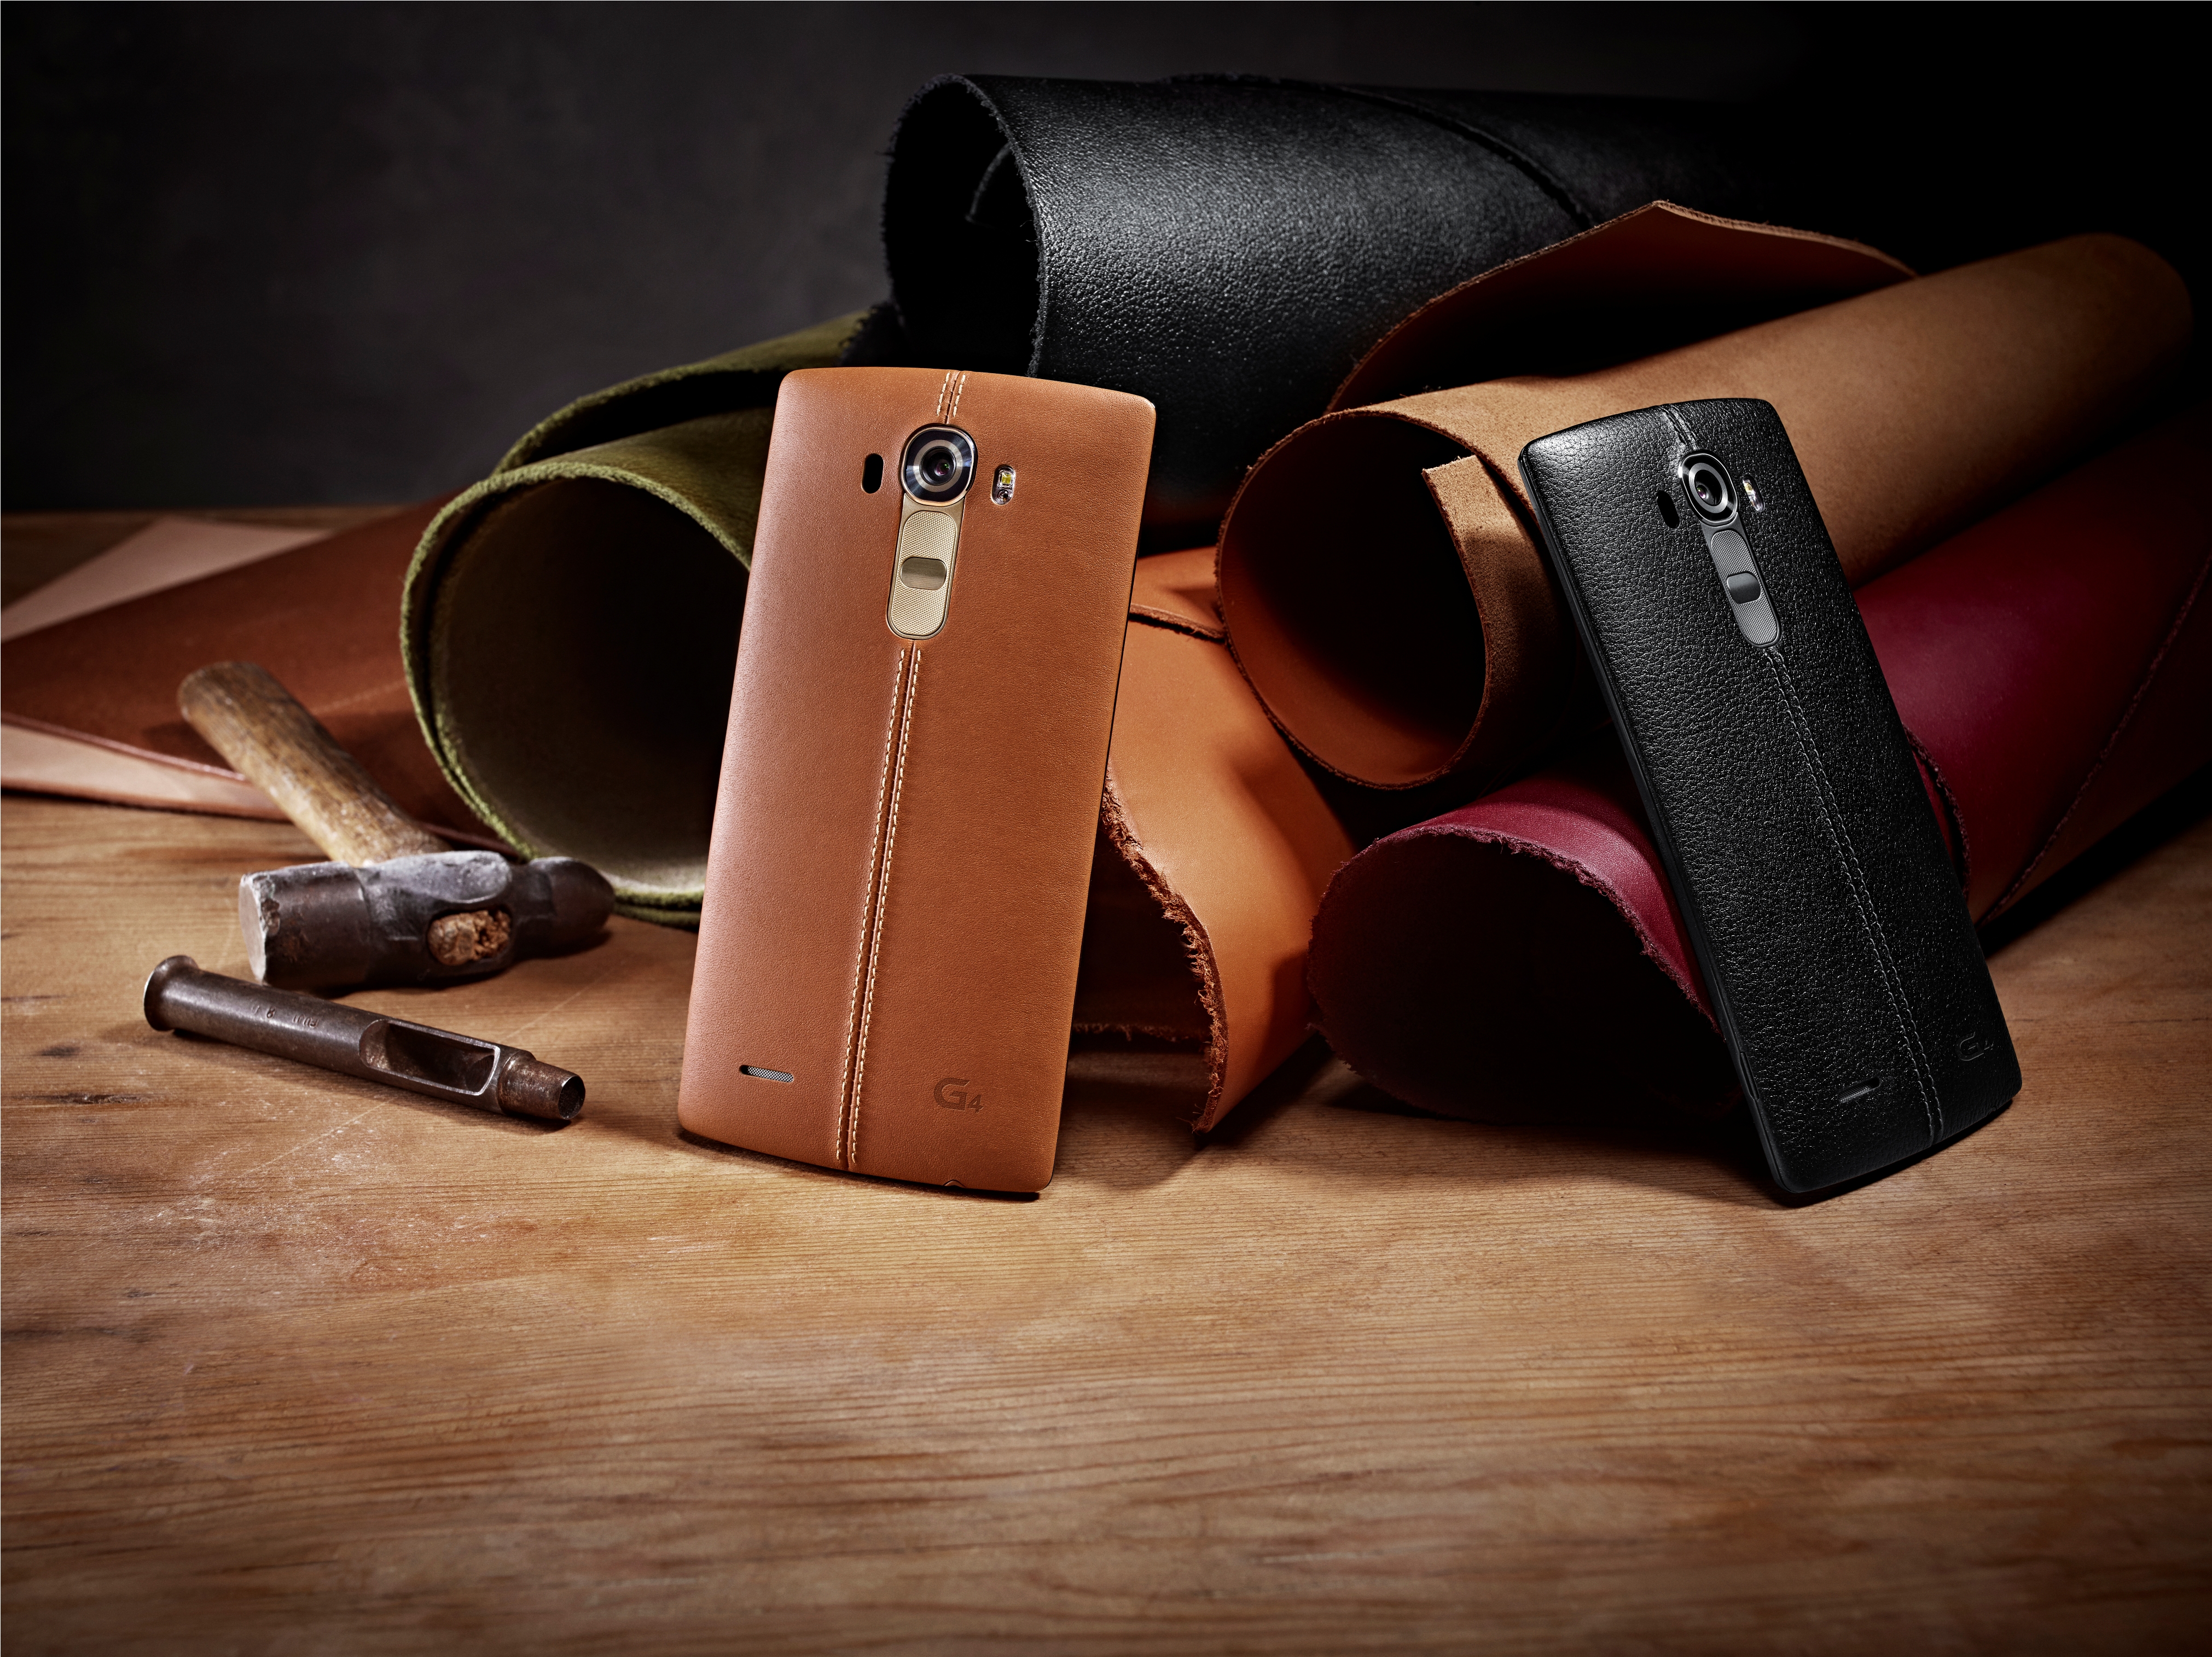 LG G4 the great